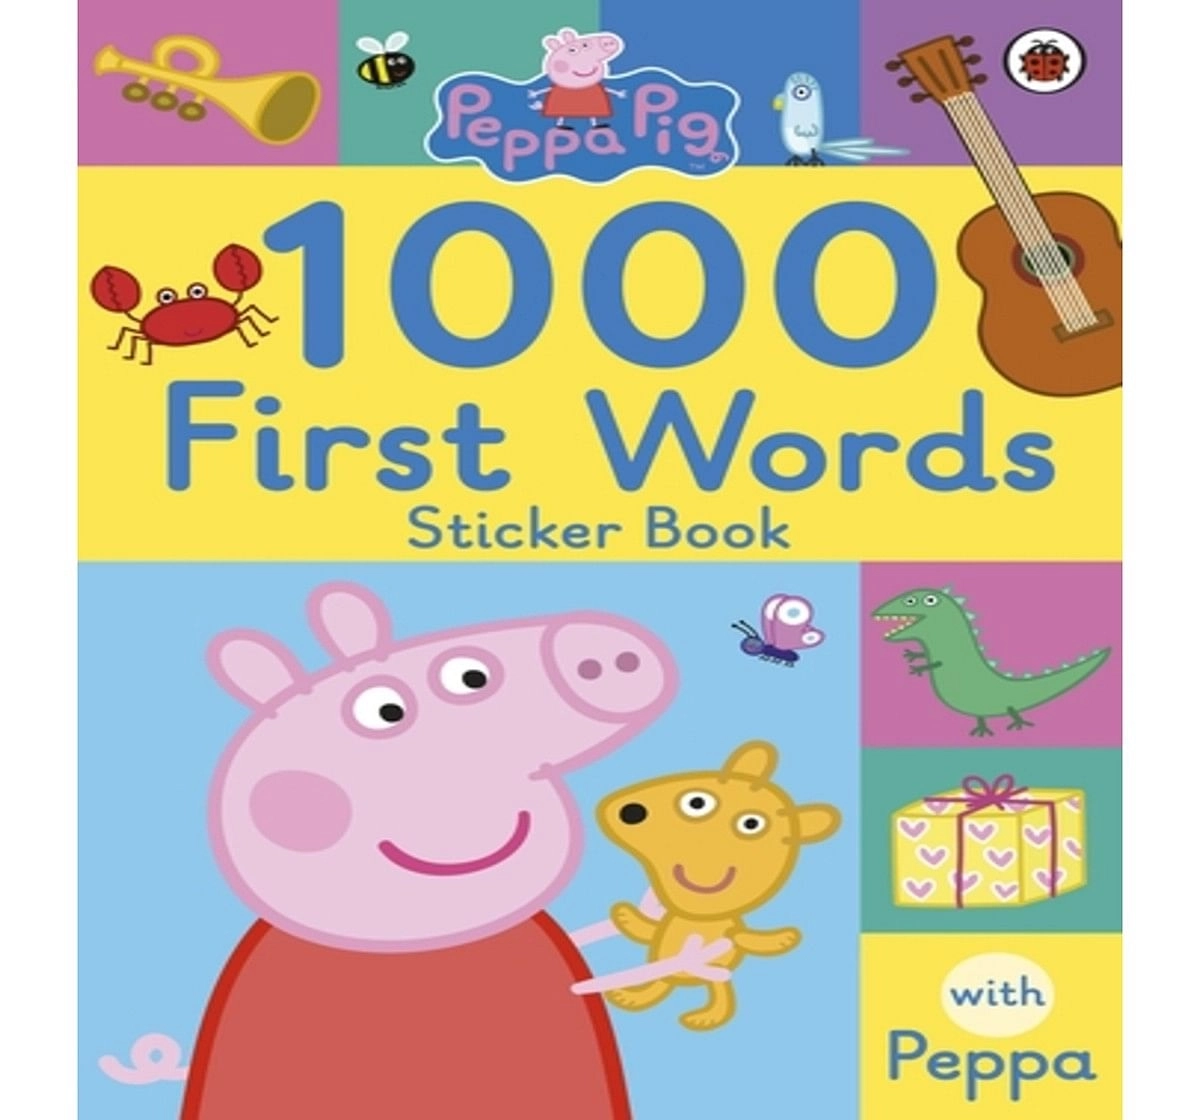 Peppa Pig : 1000 First Words Sticker Boo, 64 Pages Book by Ladybird, Paperback